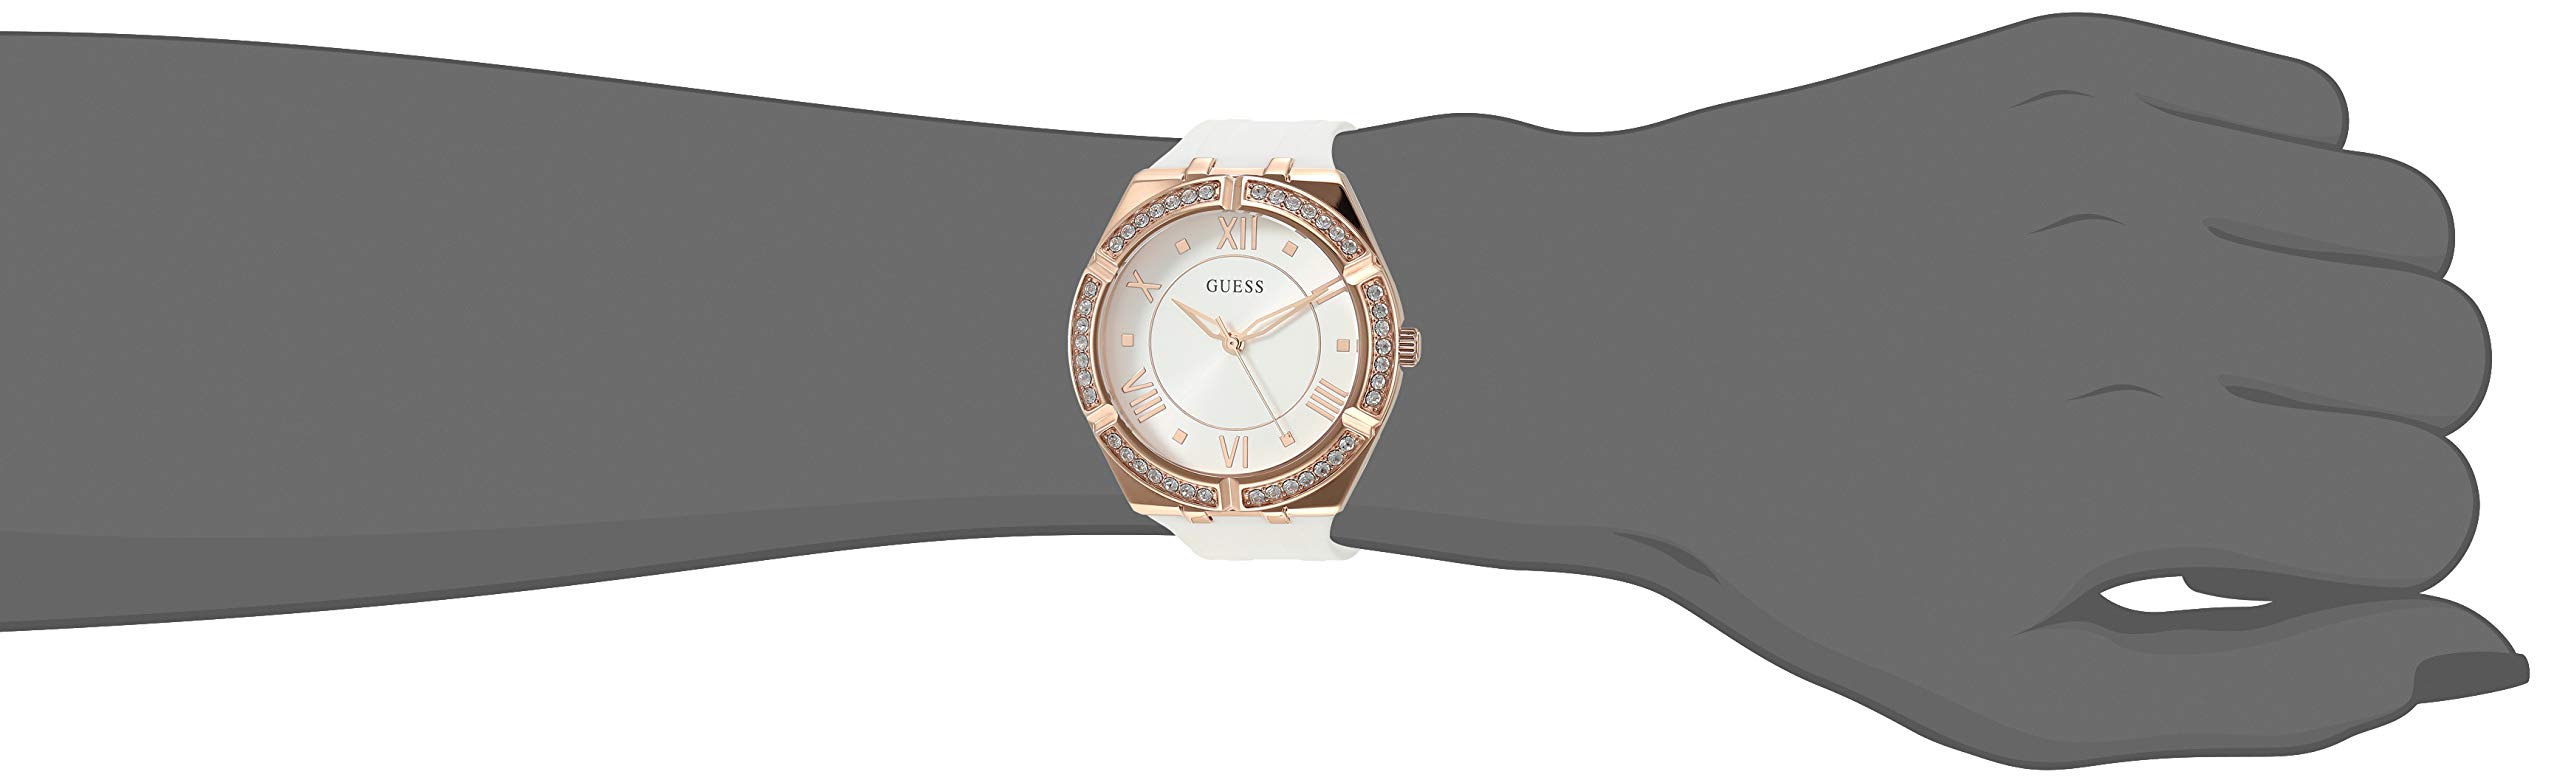 GUESS Crystal White Silicone Watch